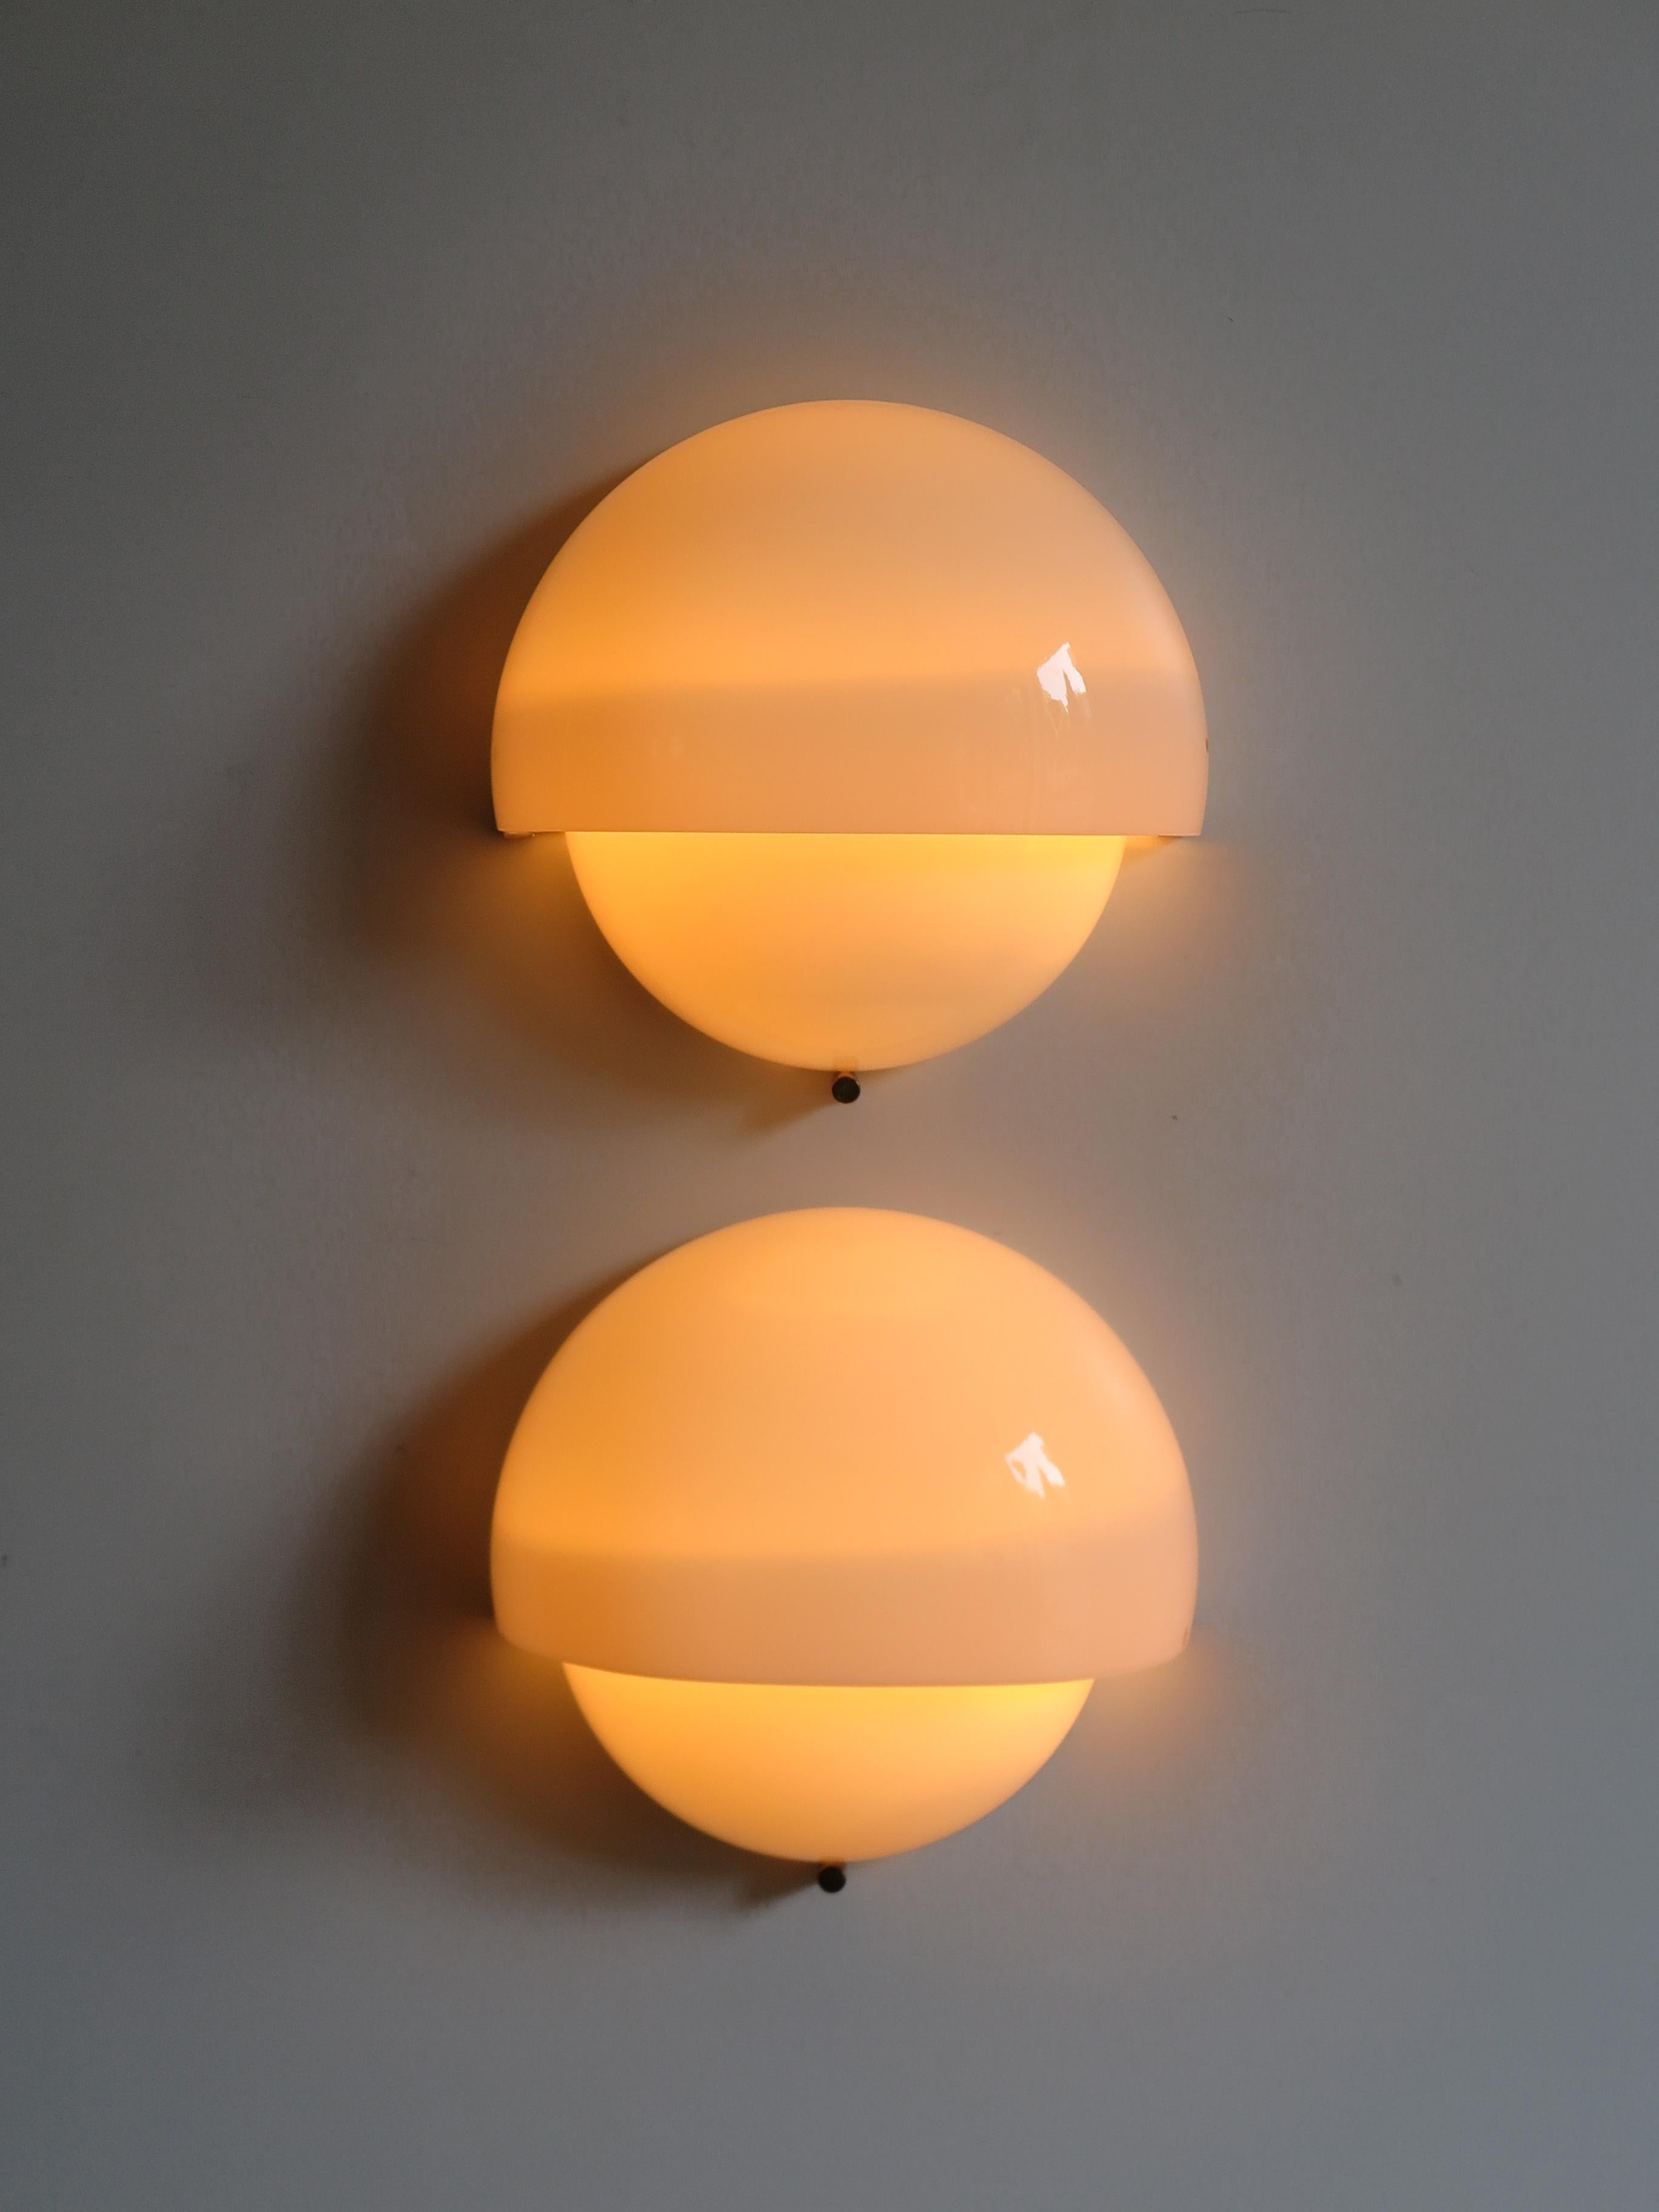 Set of two Italian sconces or wall lamps model Big Mania designed by italian designer Vico Magistretti for Artemide in 1963 model with large white opaline Murano glass and brass detail, 1960s
XIII Triennale.
Bibliography:
Repertorio del Design